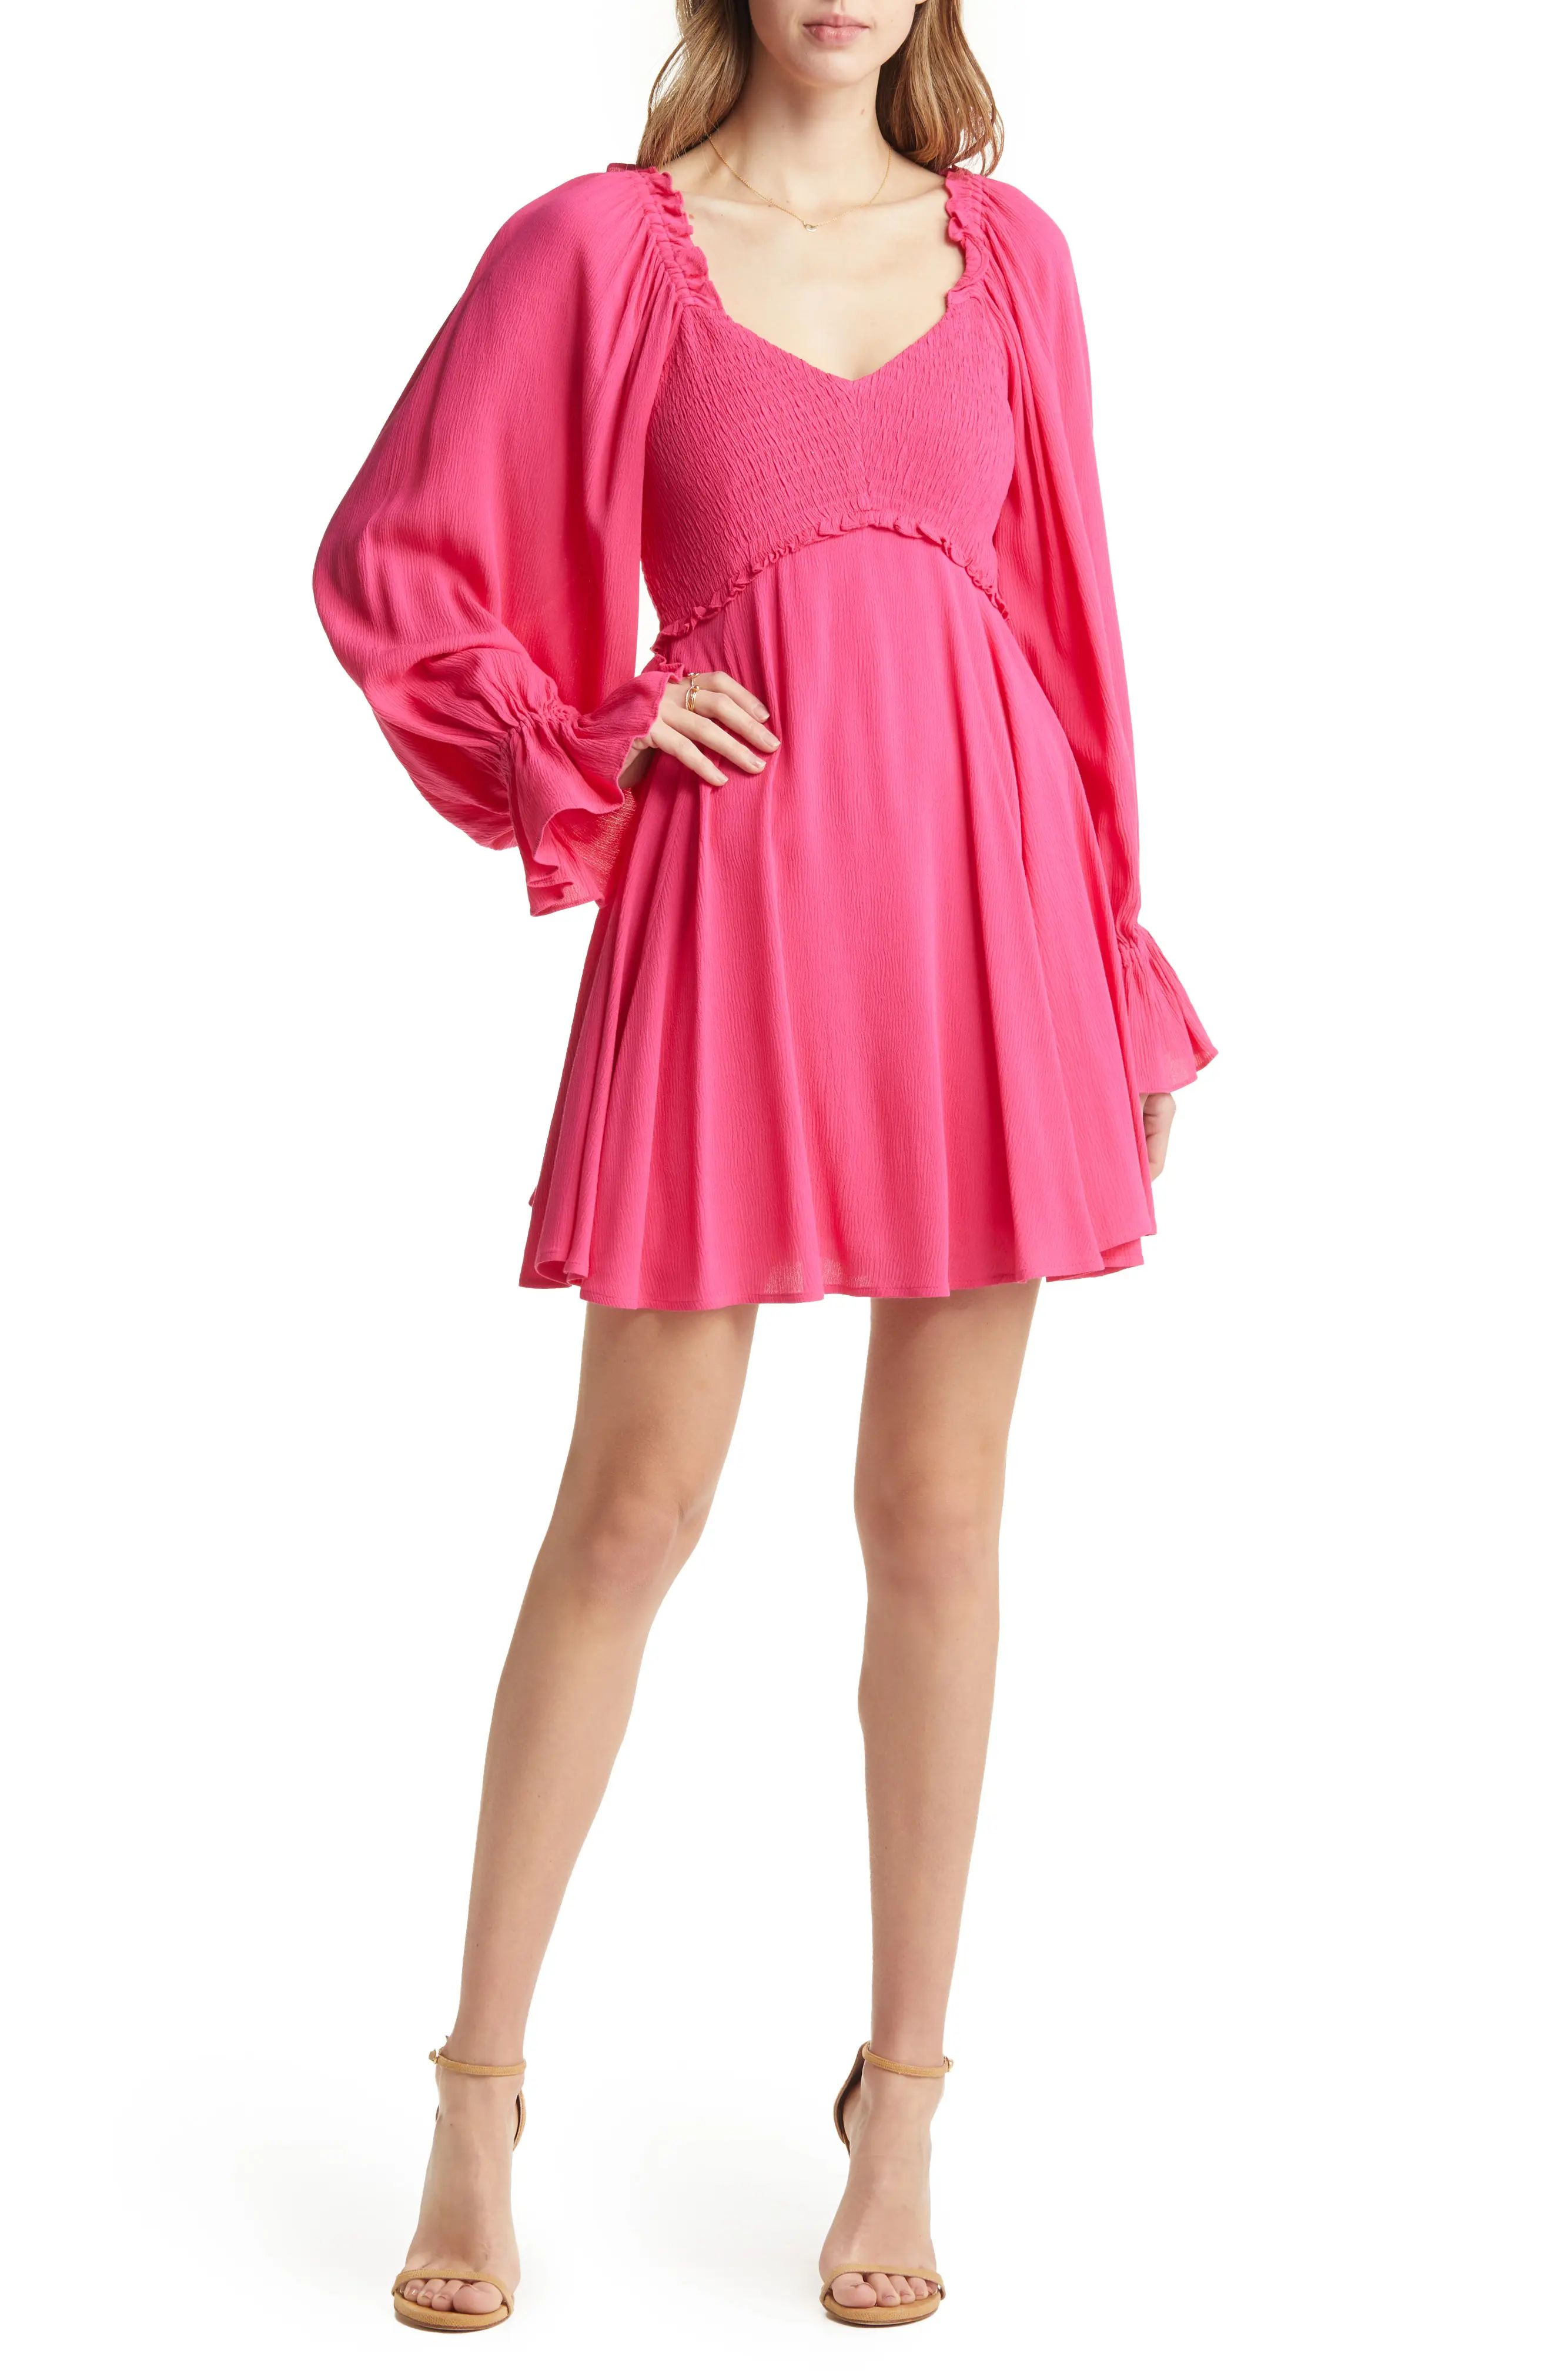 VICI Collection Smocked Long Sleeve Babydoll Dress in Hot Pink at Nordstrom, Size Medium | Nordstrom